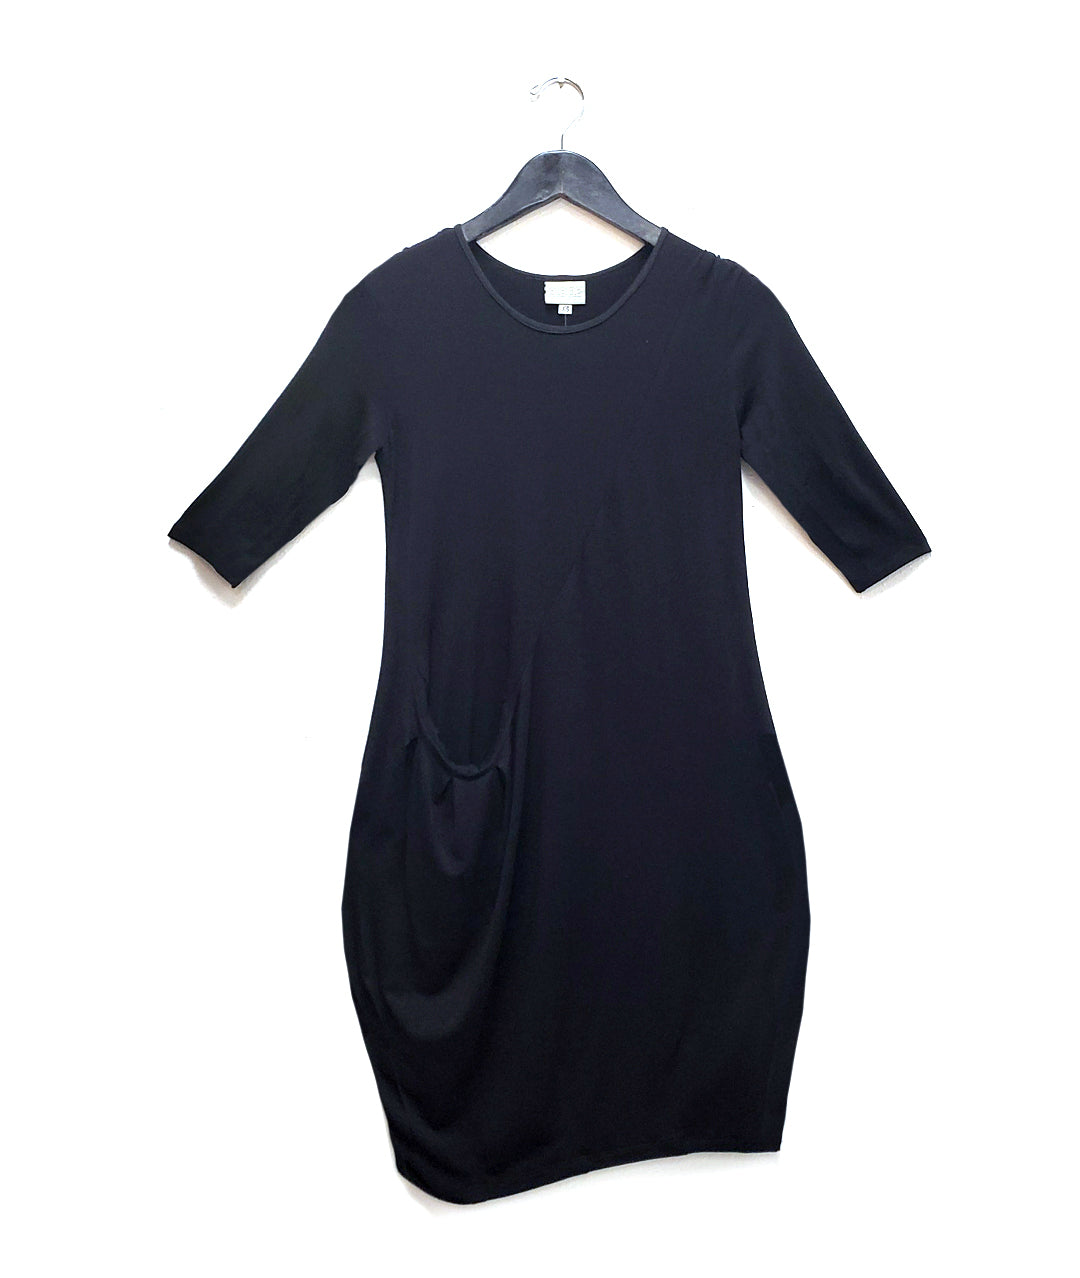 black dress with a diagonal seam across the body with a pocket set in the seam